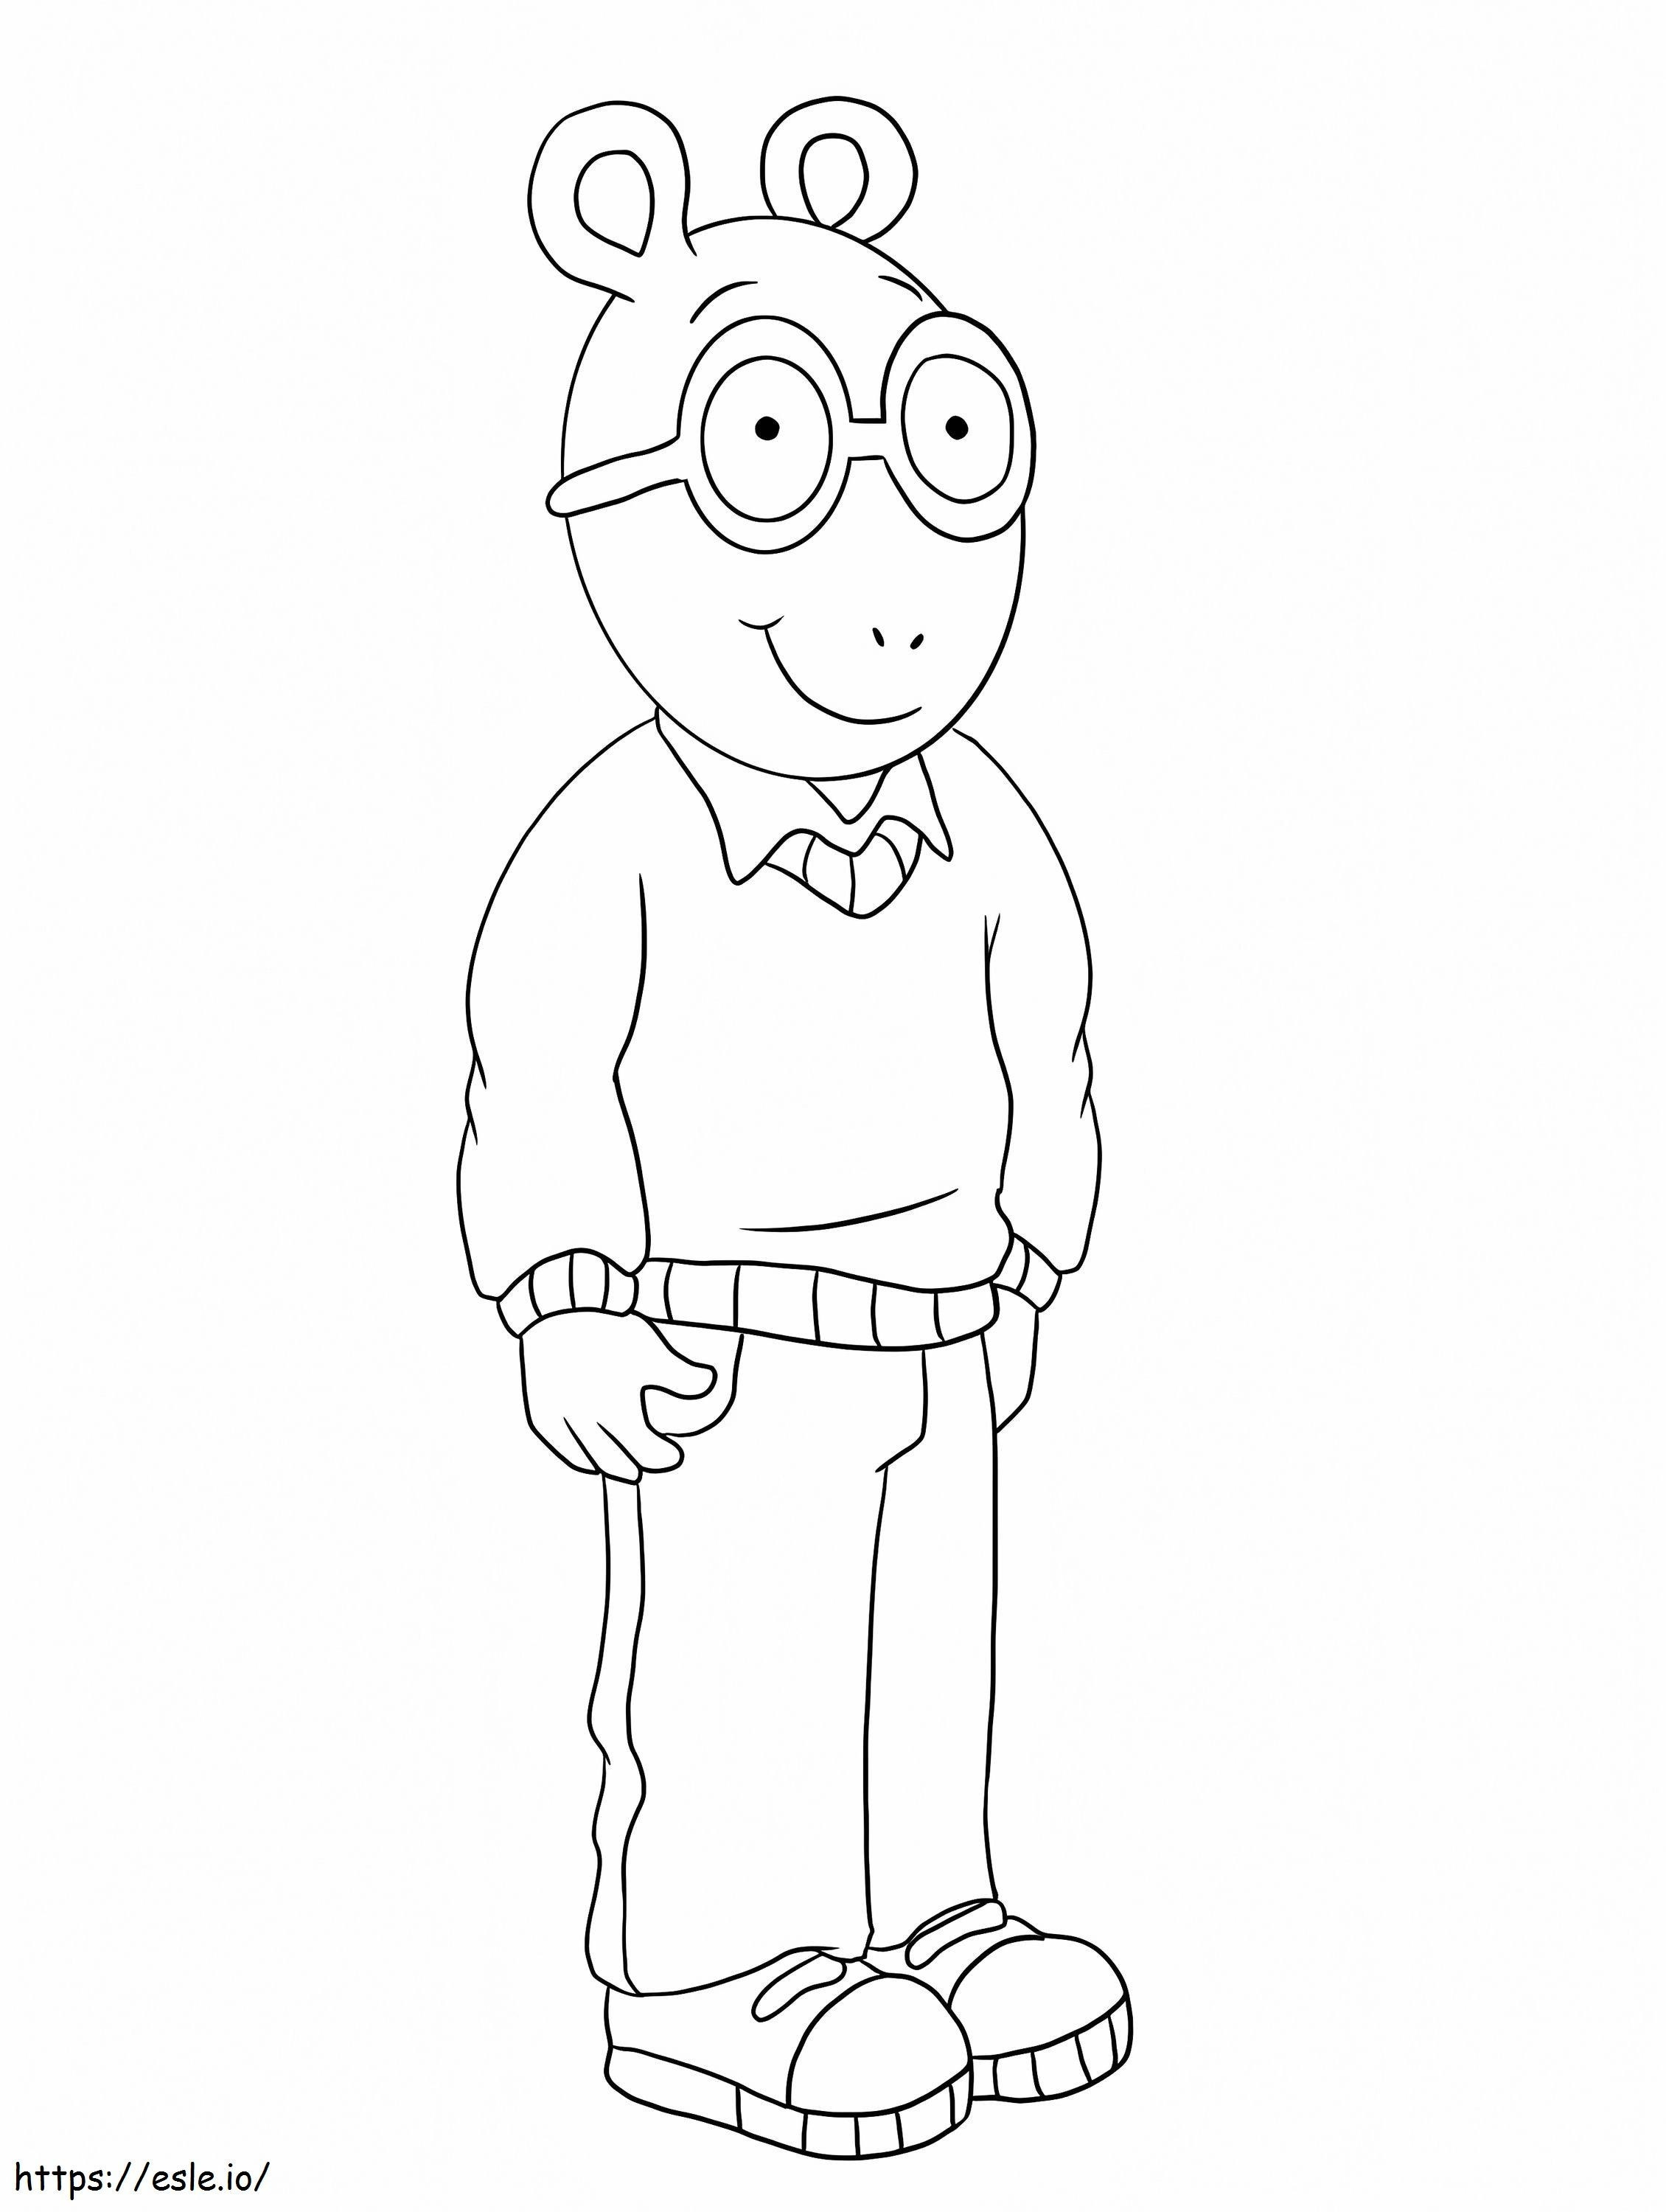 1580526059 How To Draw Arthur Timothy Read From Arthur Step 6 1 000000004749 5 coloring page